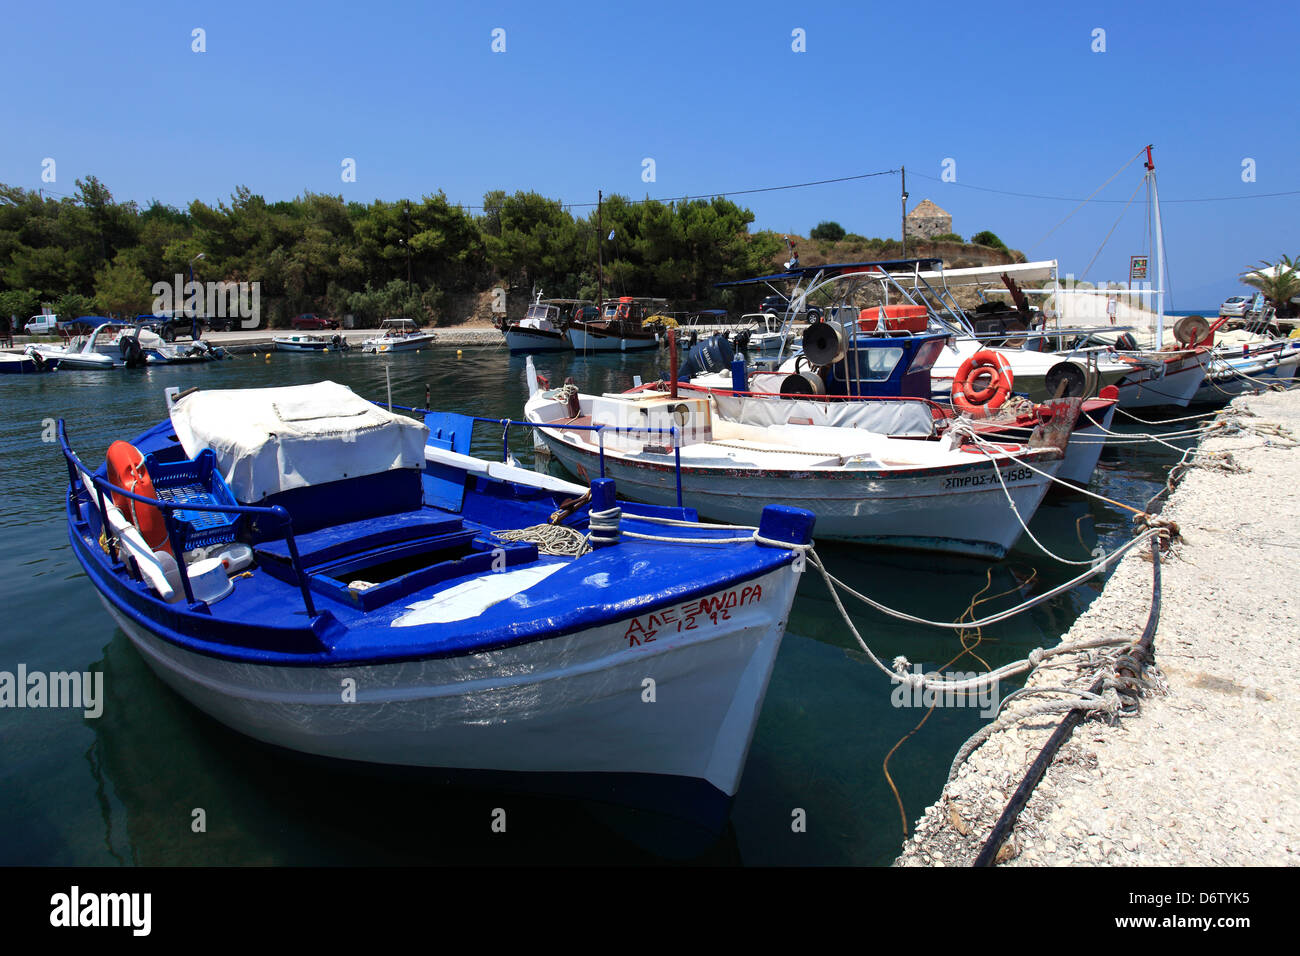 View over tourist and fishing boats in the harbour at Tsilivi resort, Zakynthos Island, Zante, Greece, Europe. Stock Photo